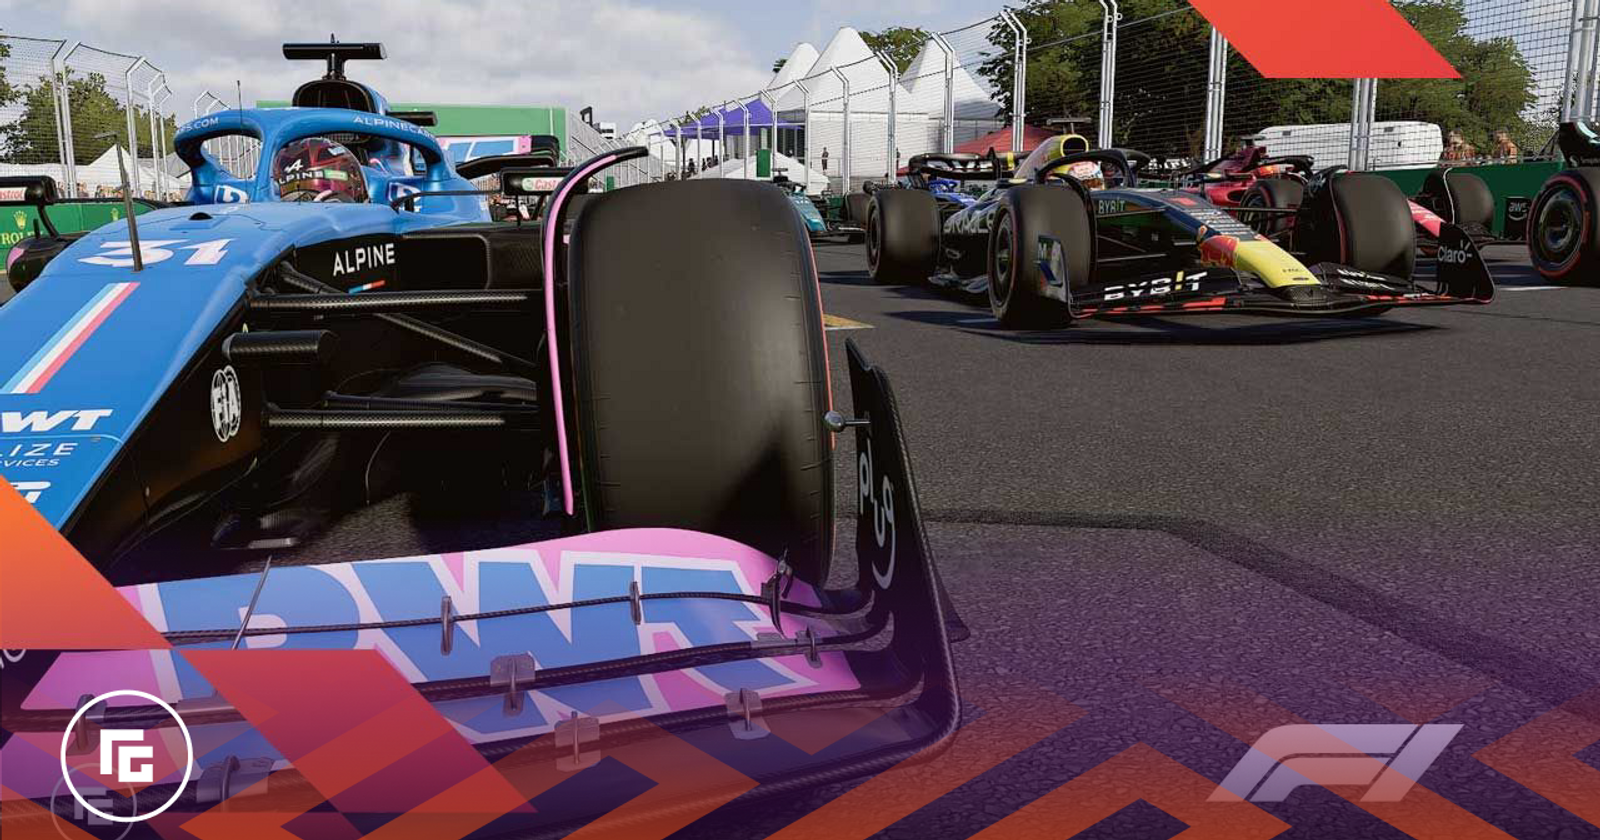 F1 23 ULTIMATE GUIDE: Setup guides, F1 World, tips, & more